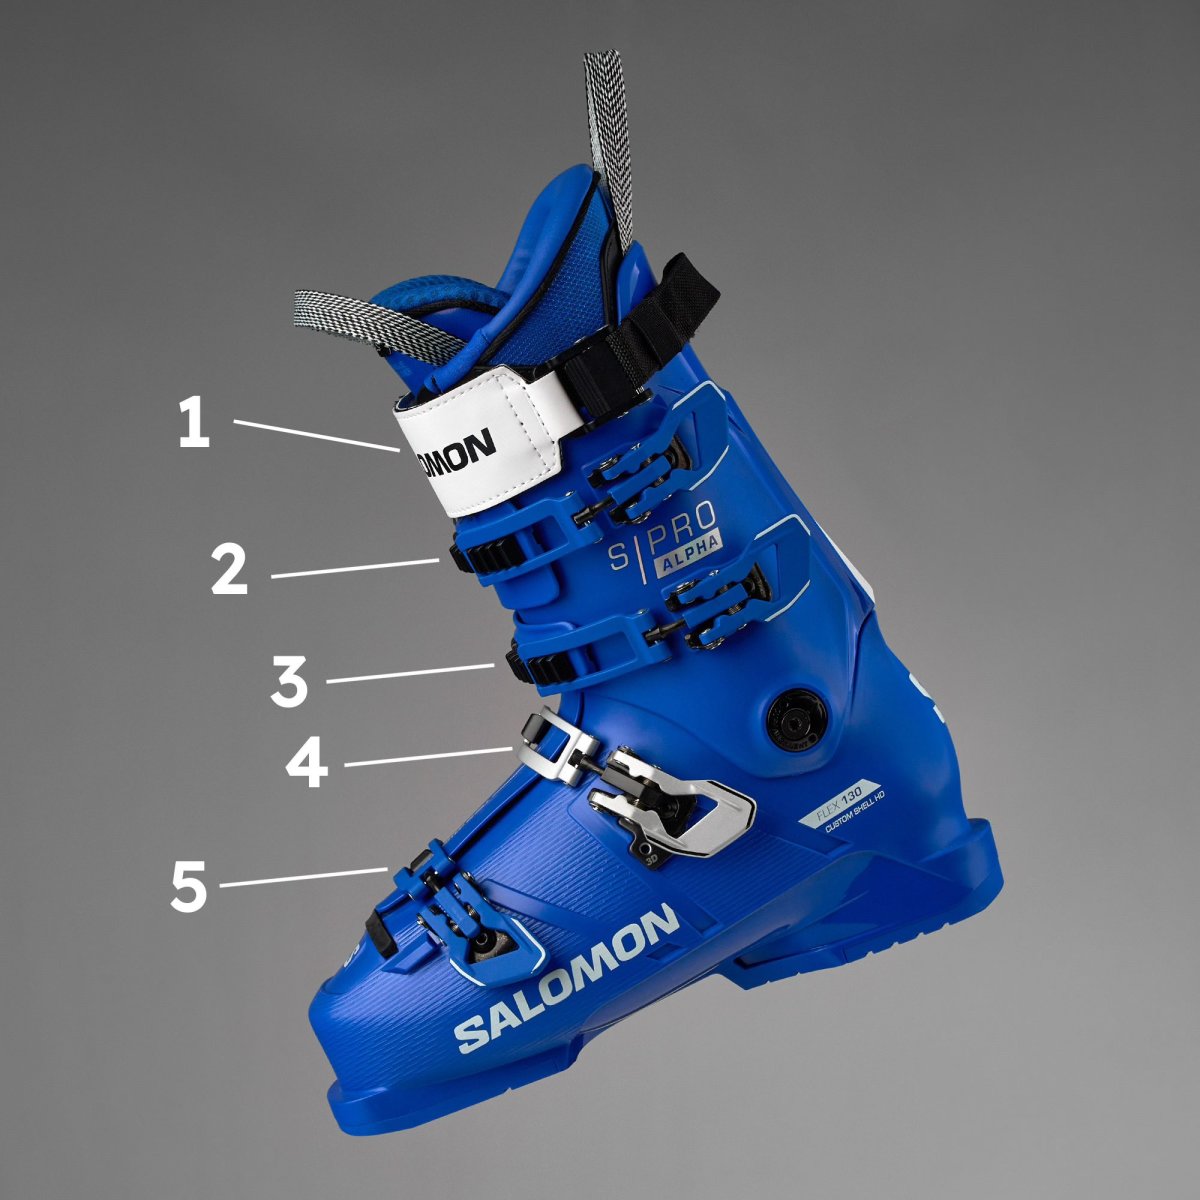 Debate Over How To Properly Buckle Ski Boots Is Taking The Internet By ...